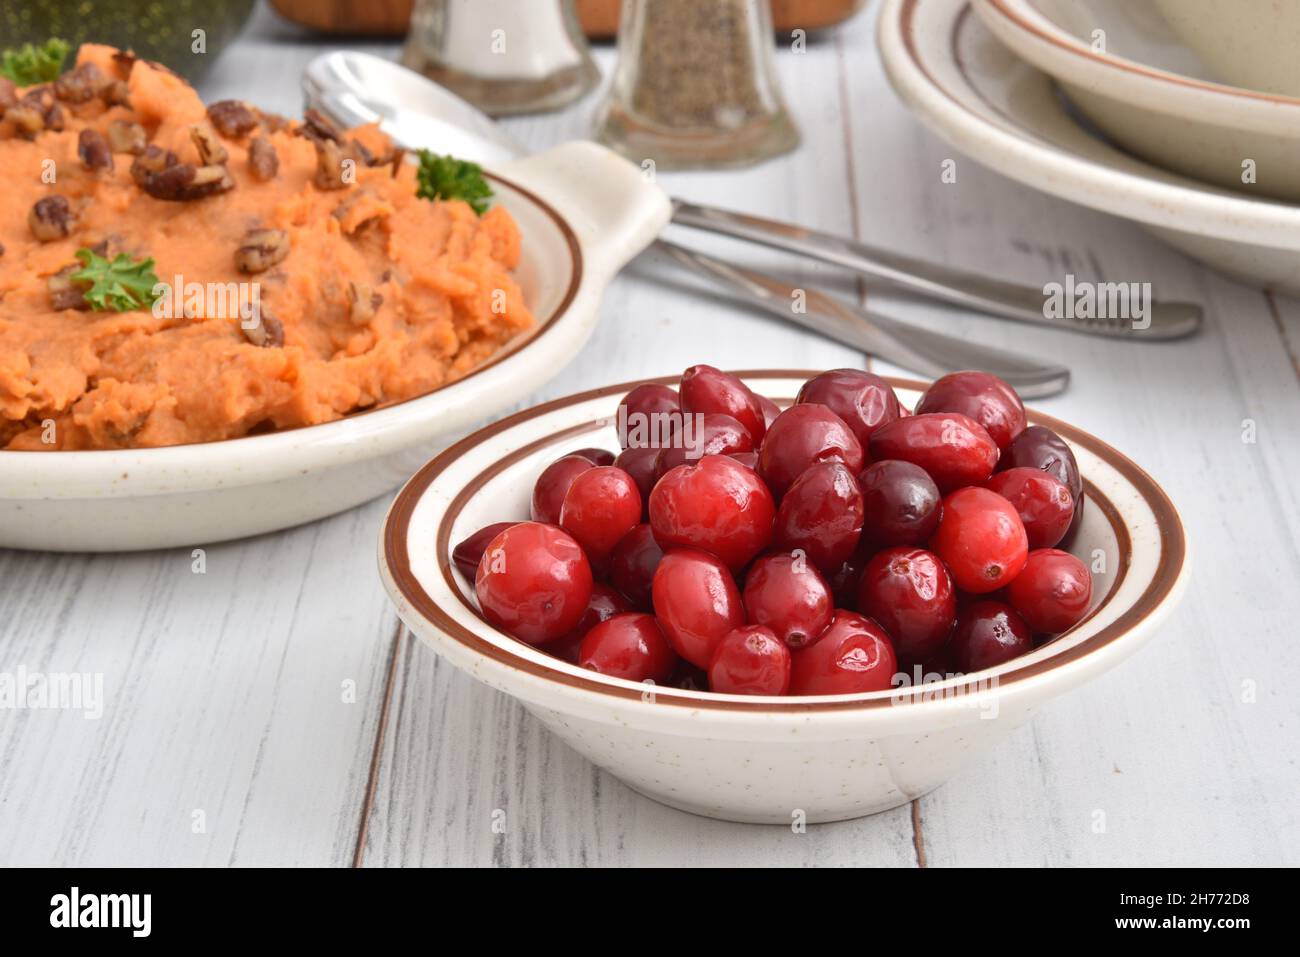 Bowl of fresh cranberries on a holiday dinner table with mashed sweet potatoes Stock Photo